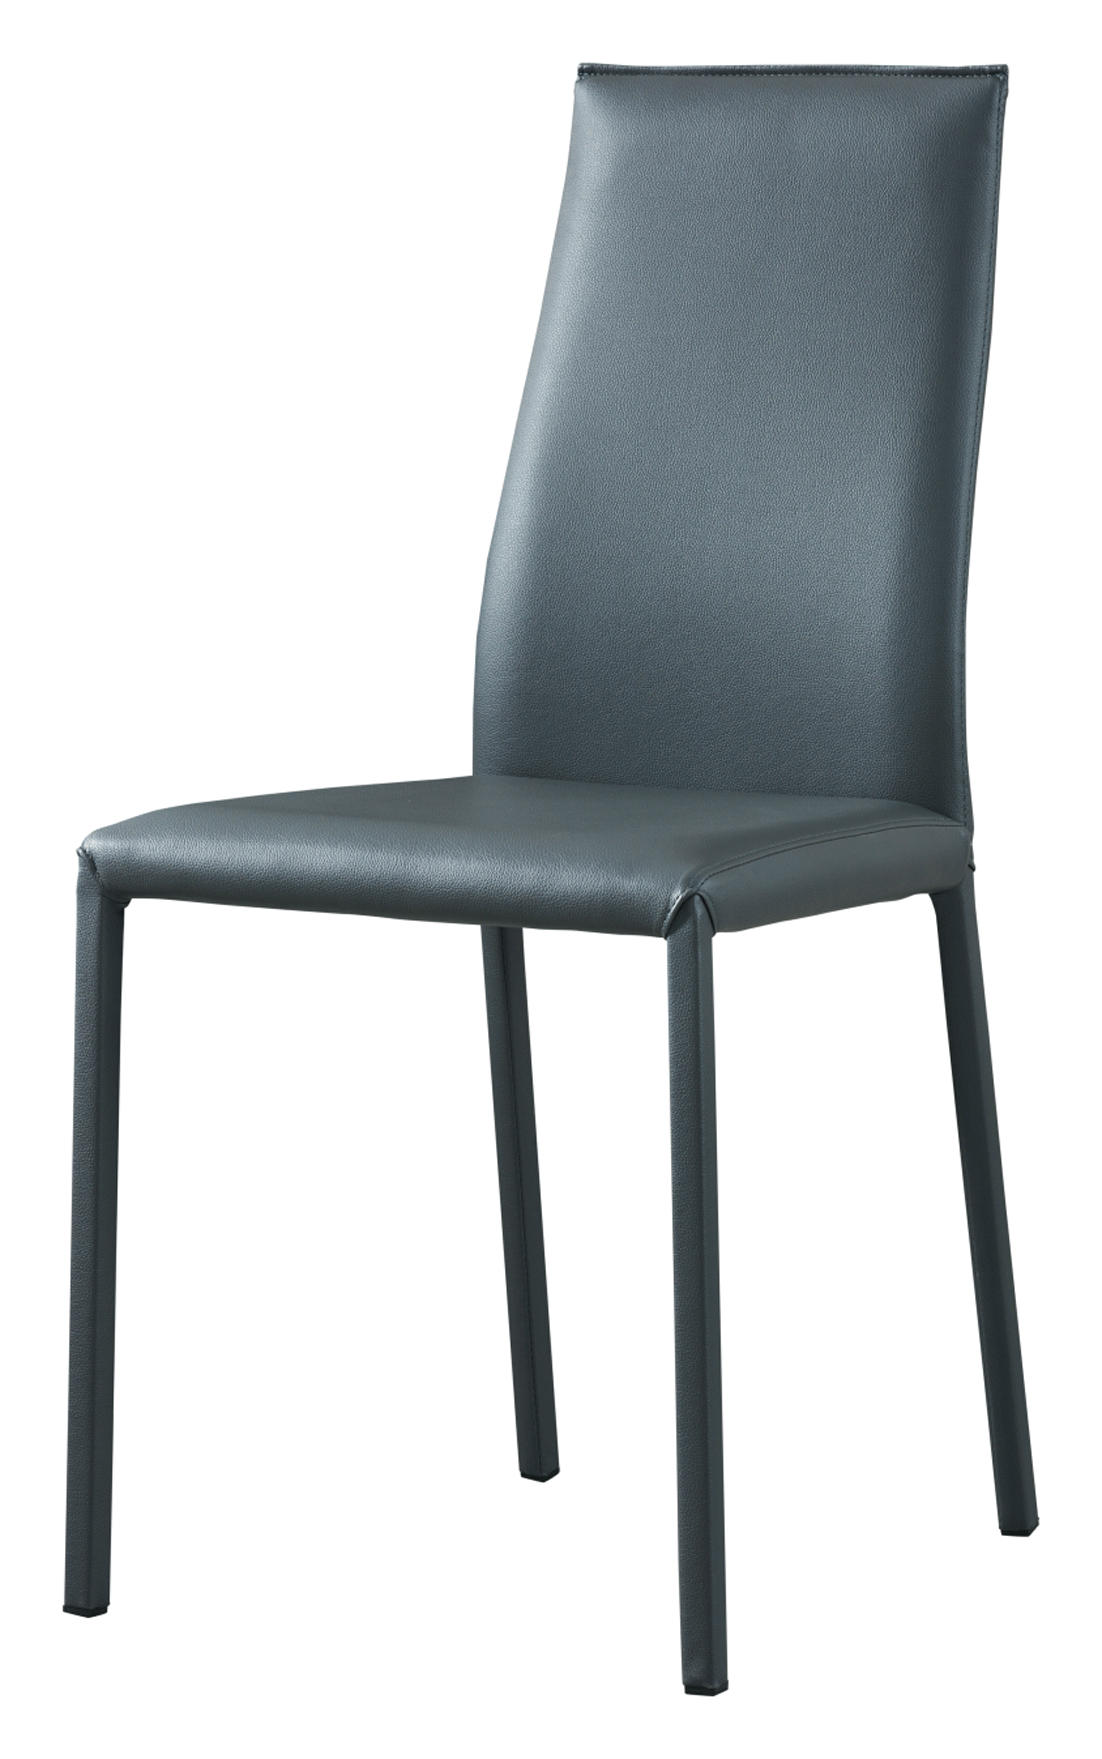 Brands WCH Modern Living Special Order 196 Grey Chairs